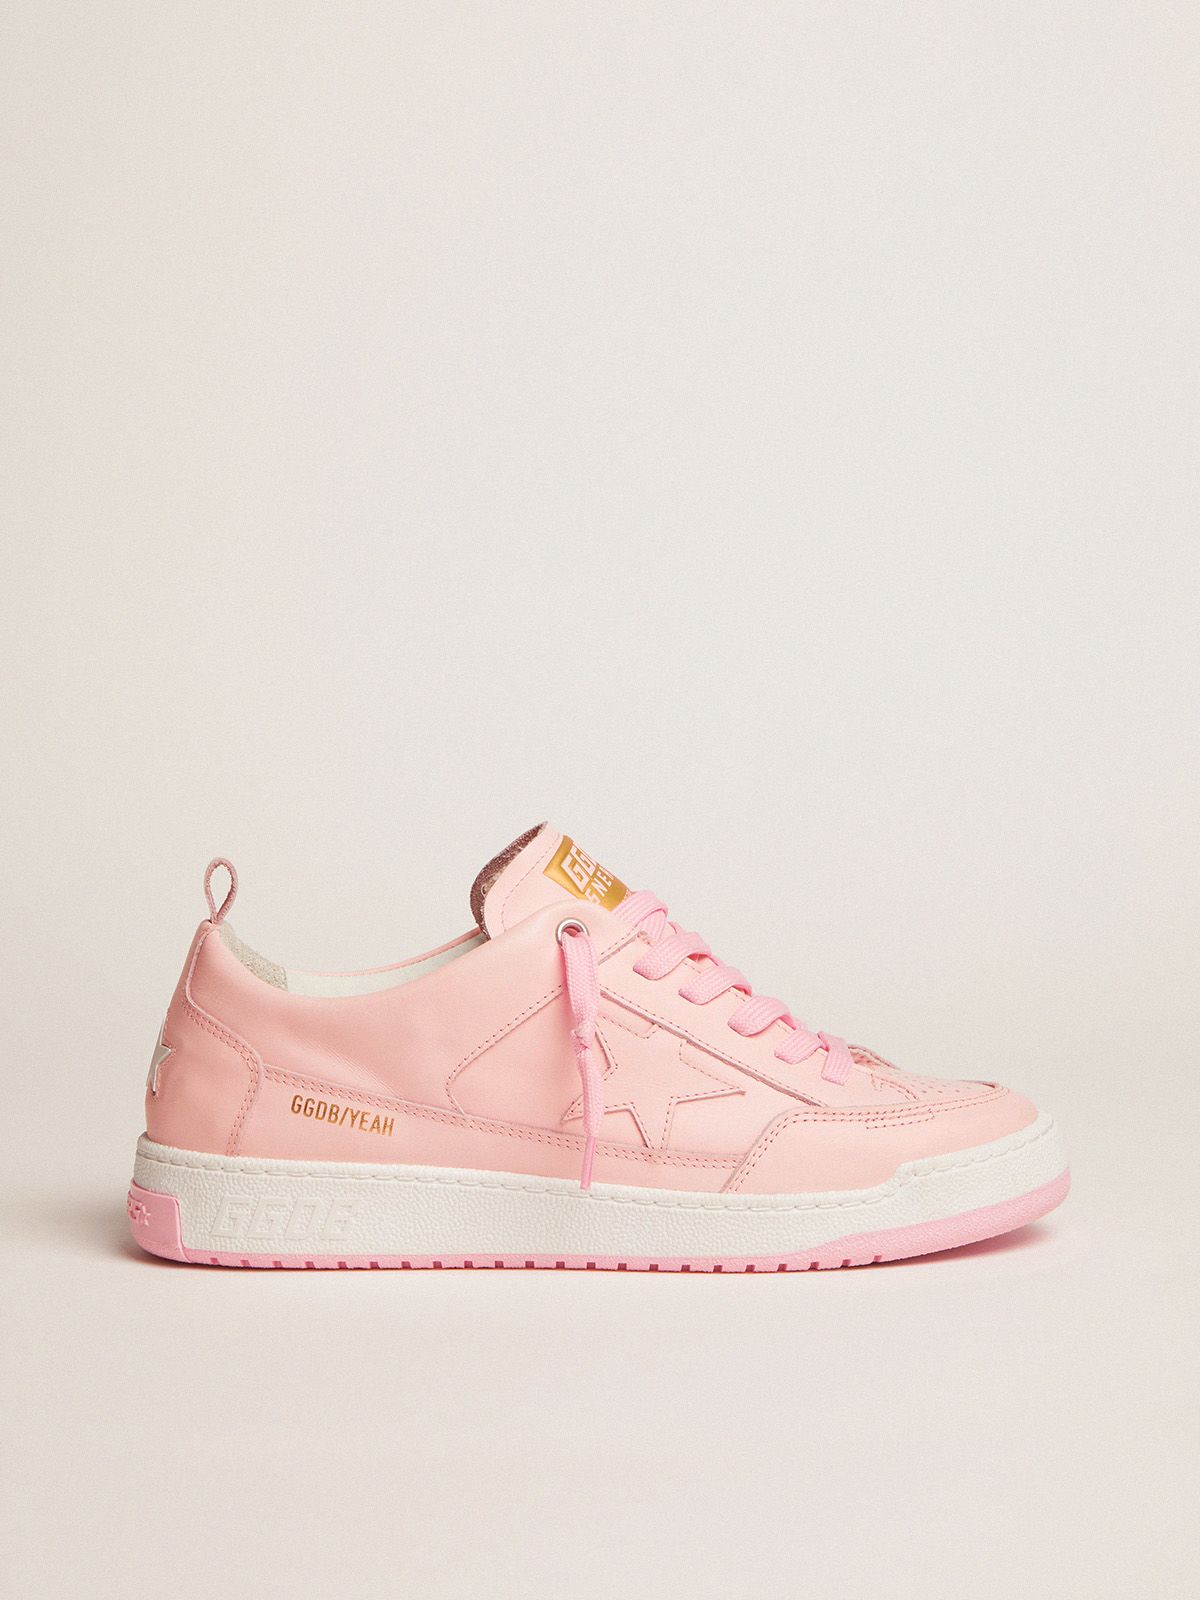 golden goose Yeah pink sneakers in leather pale